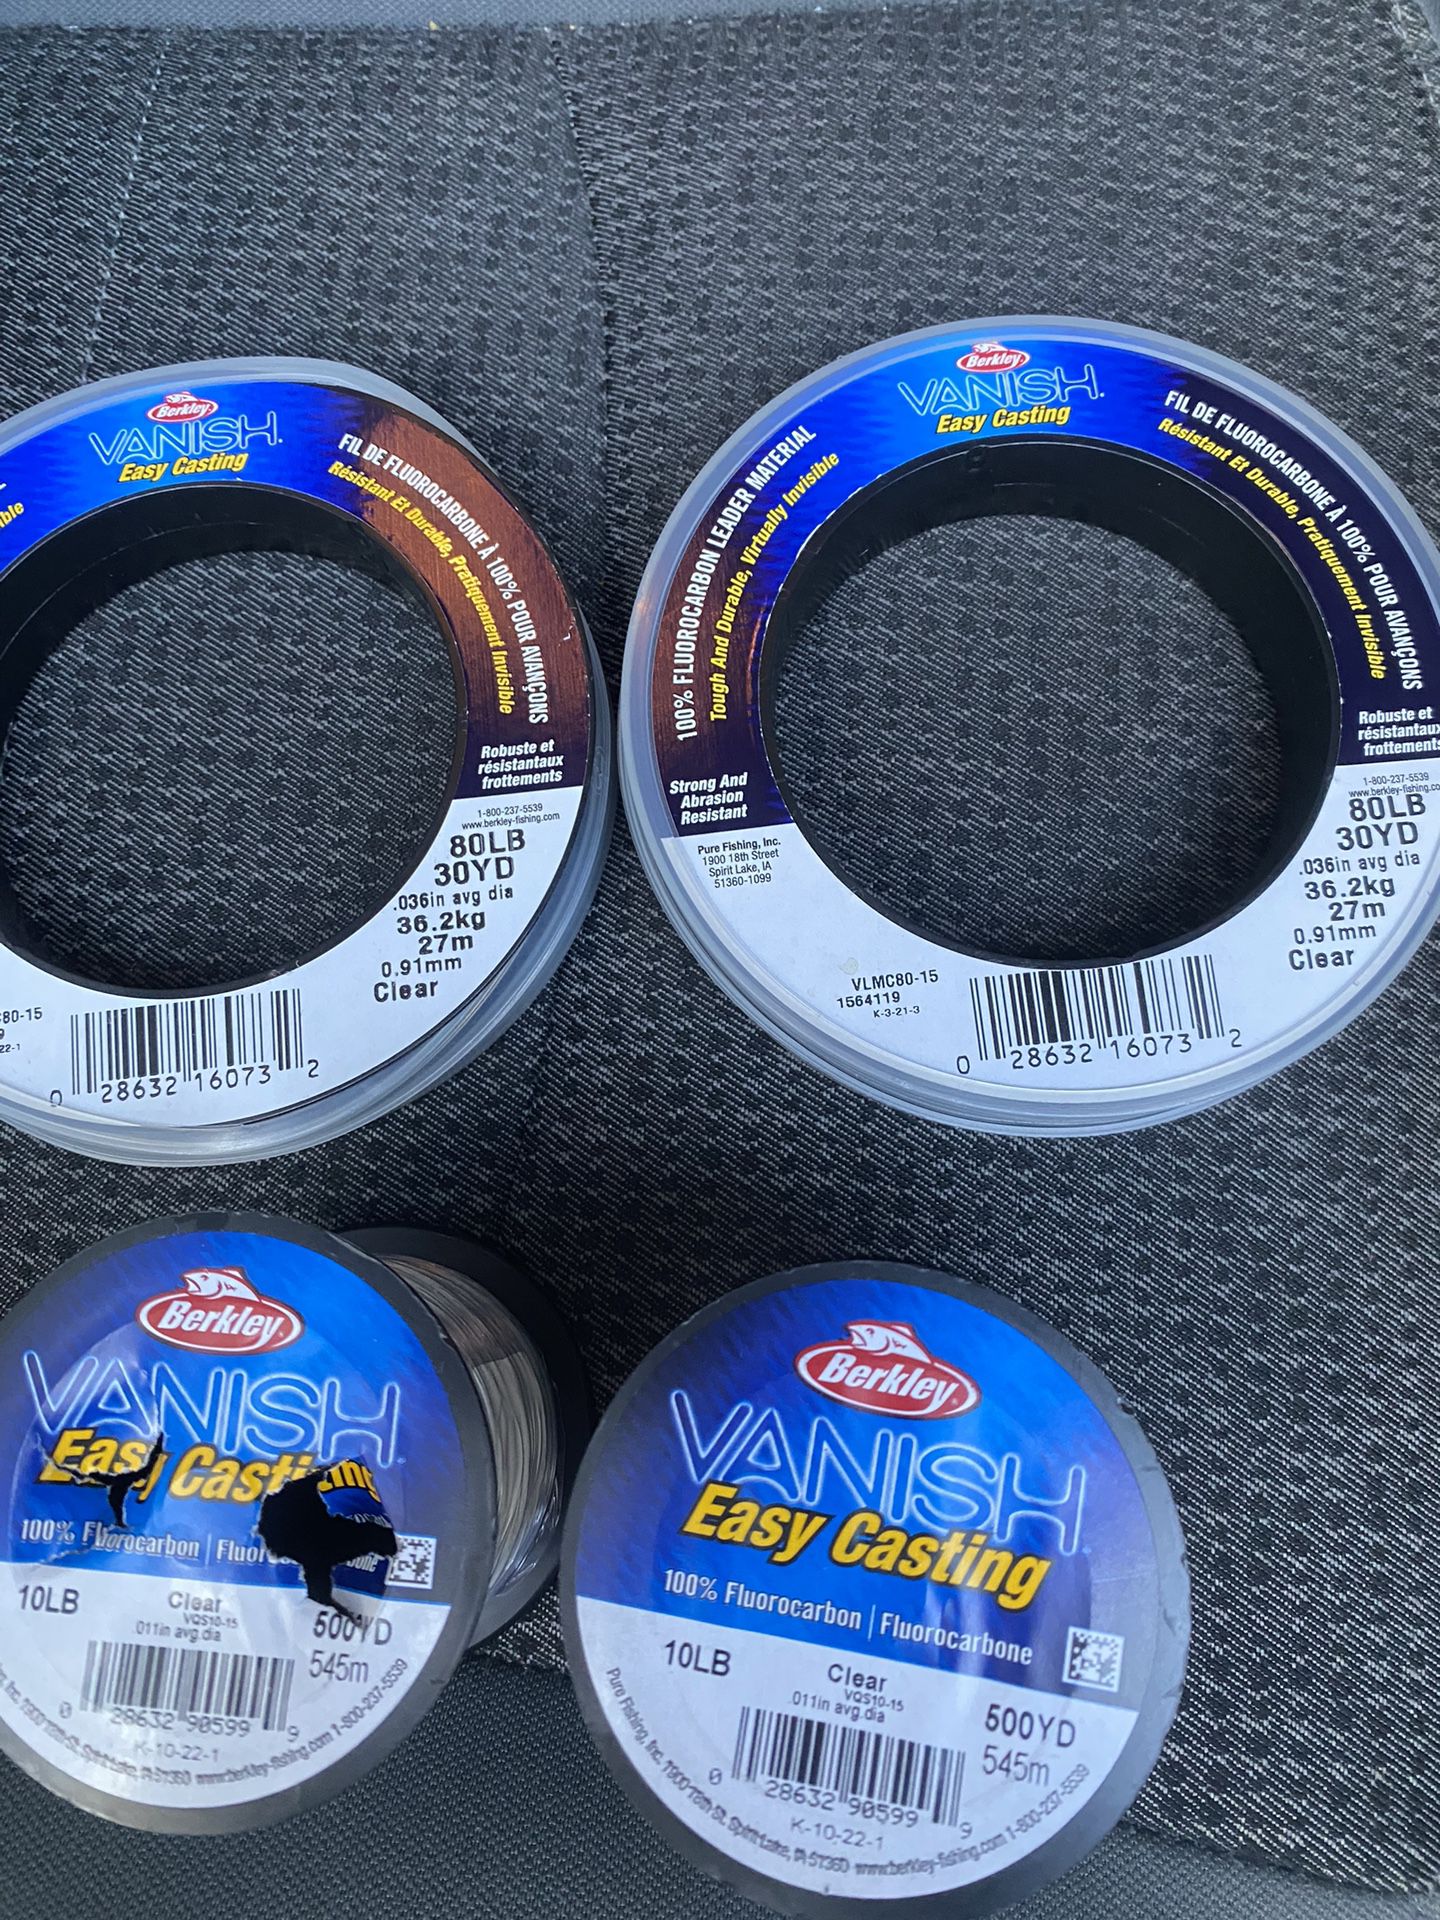 Brand New 80 Lb Vanish Leader Line, and Two Spools Of 10 Pound Test fishing  line for Sale in Port St. Lucie, FL - OfferUp